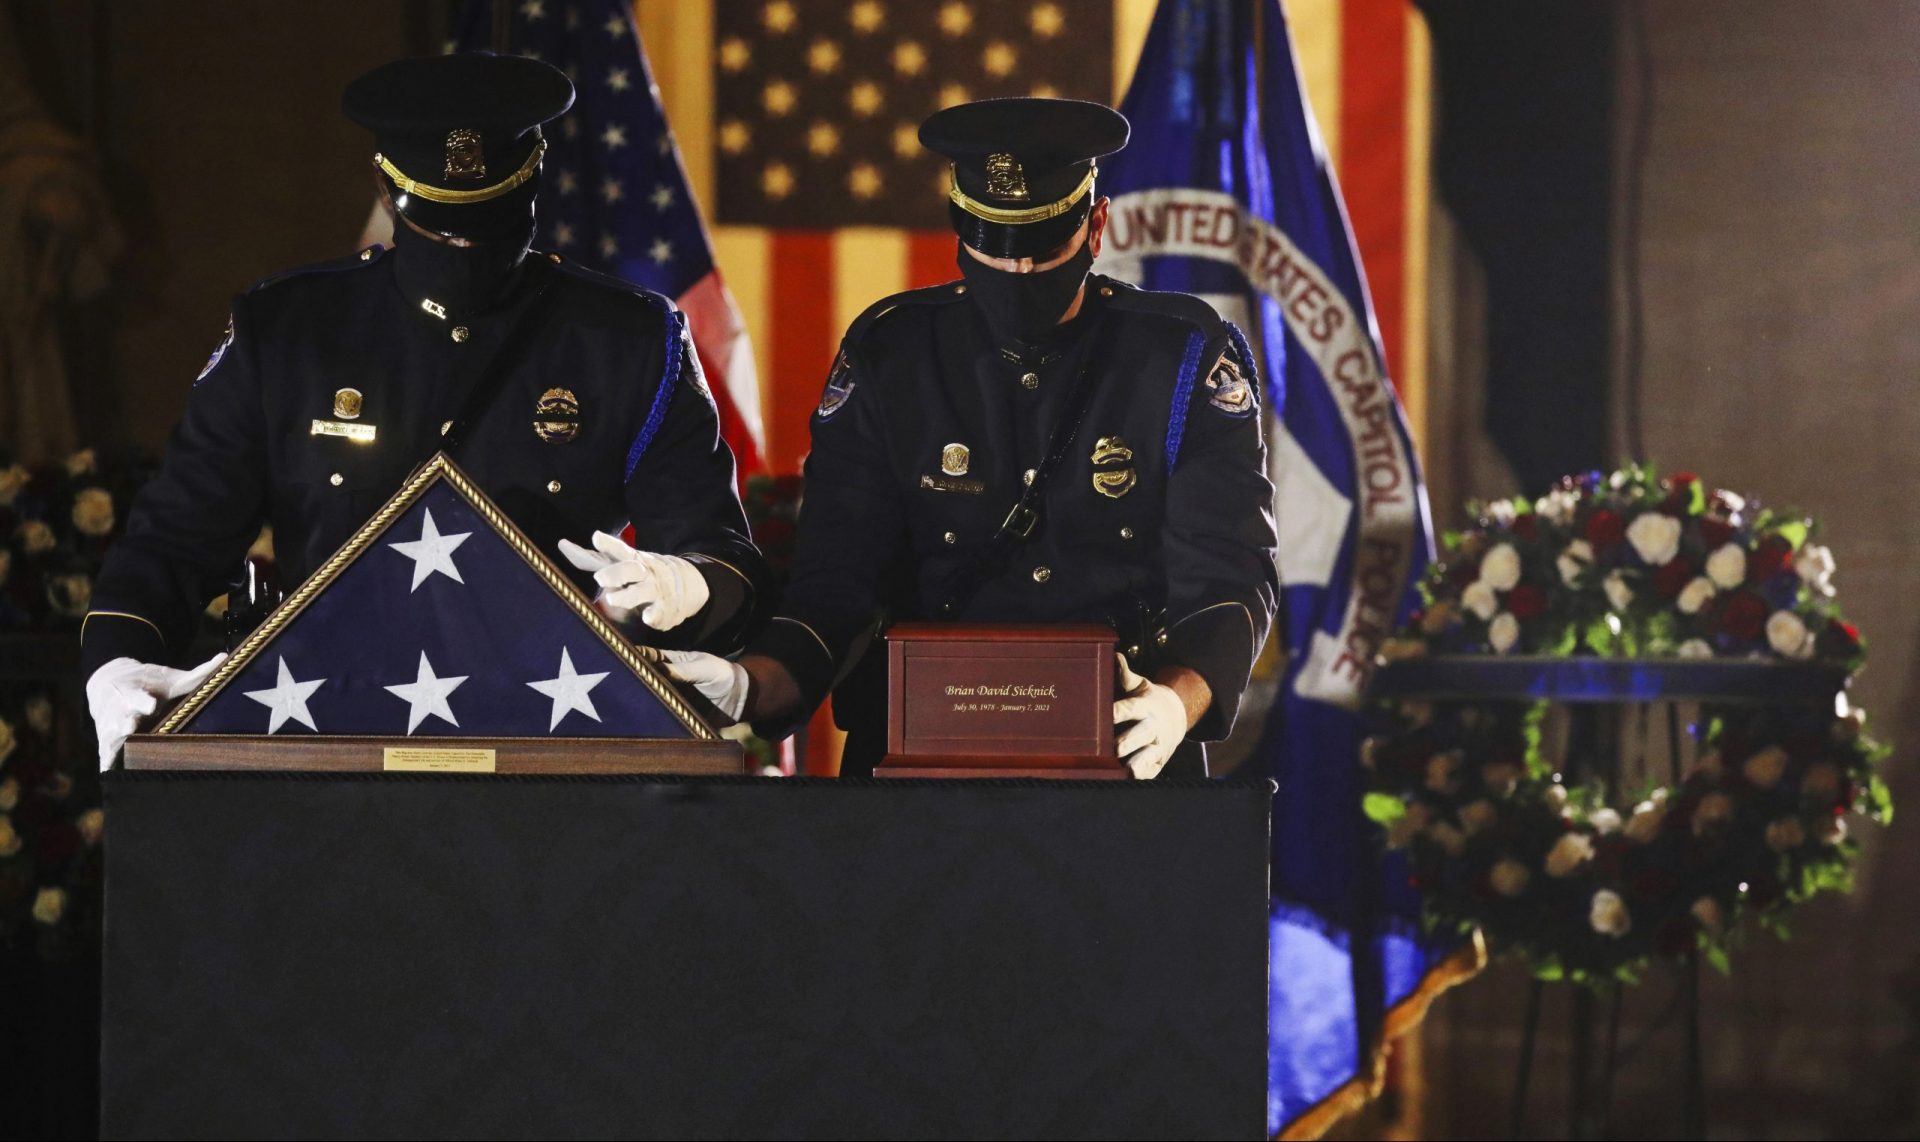 An honor guard places an urn with the cremated remains of U.S. Capitol Police officer Brian Sicknick and folded flag on a black-draped table at center of the Capitol Rotunda to lie in honor Tuesday, Feb. 2, 2021, in Washington.